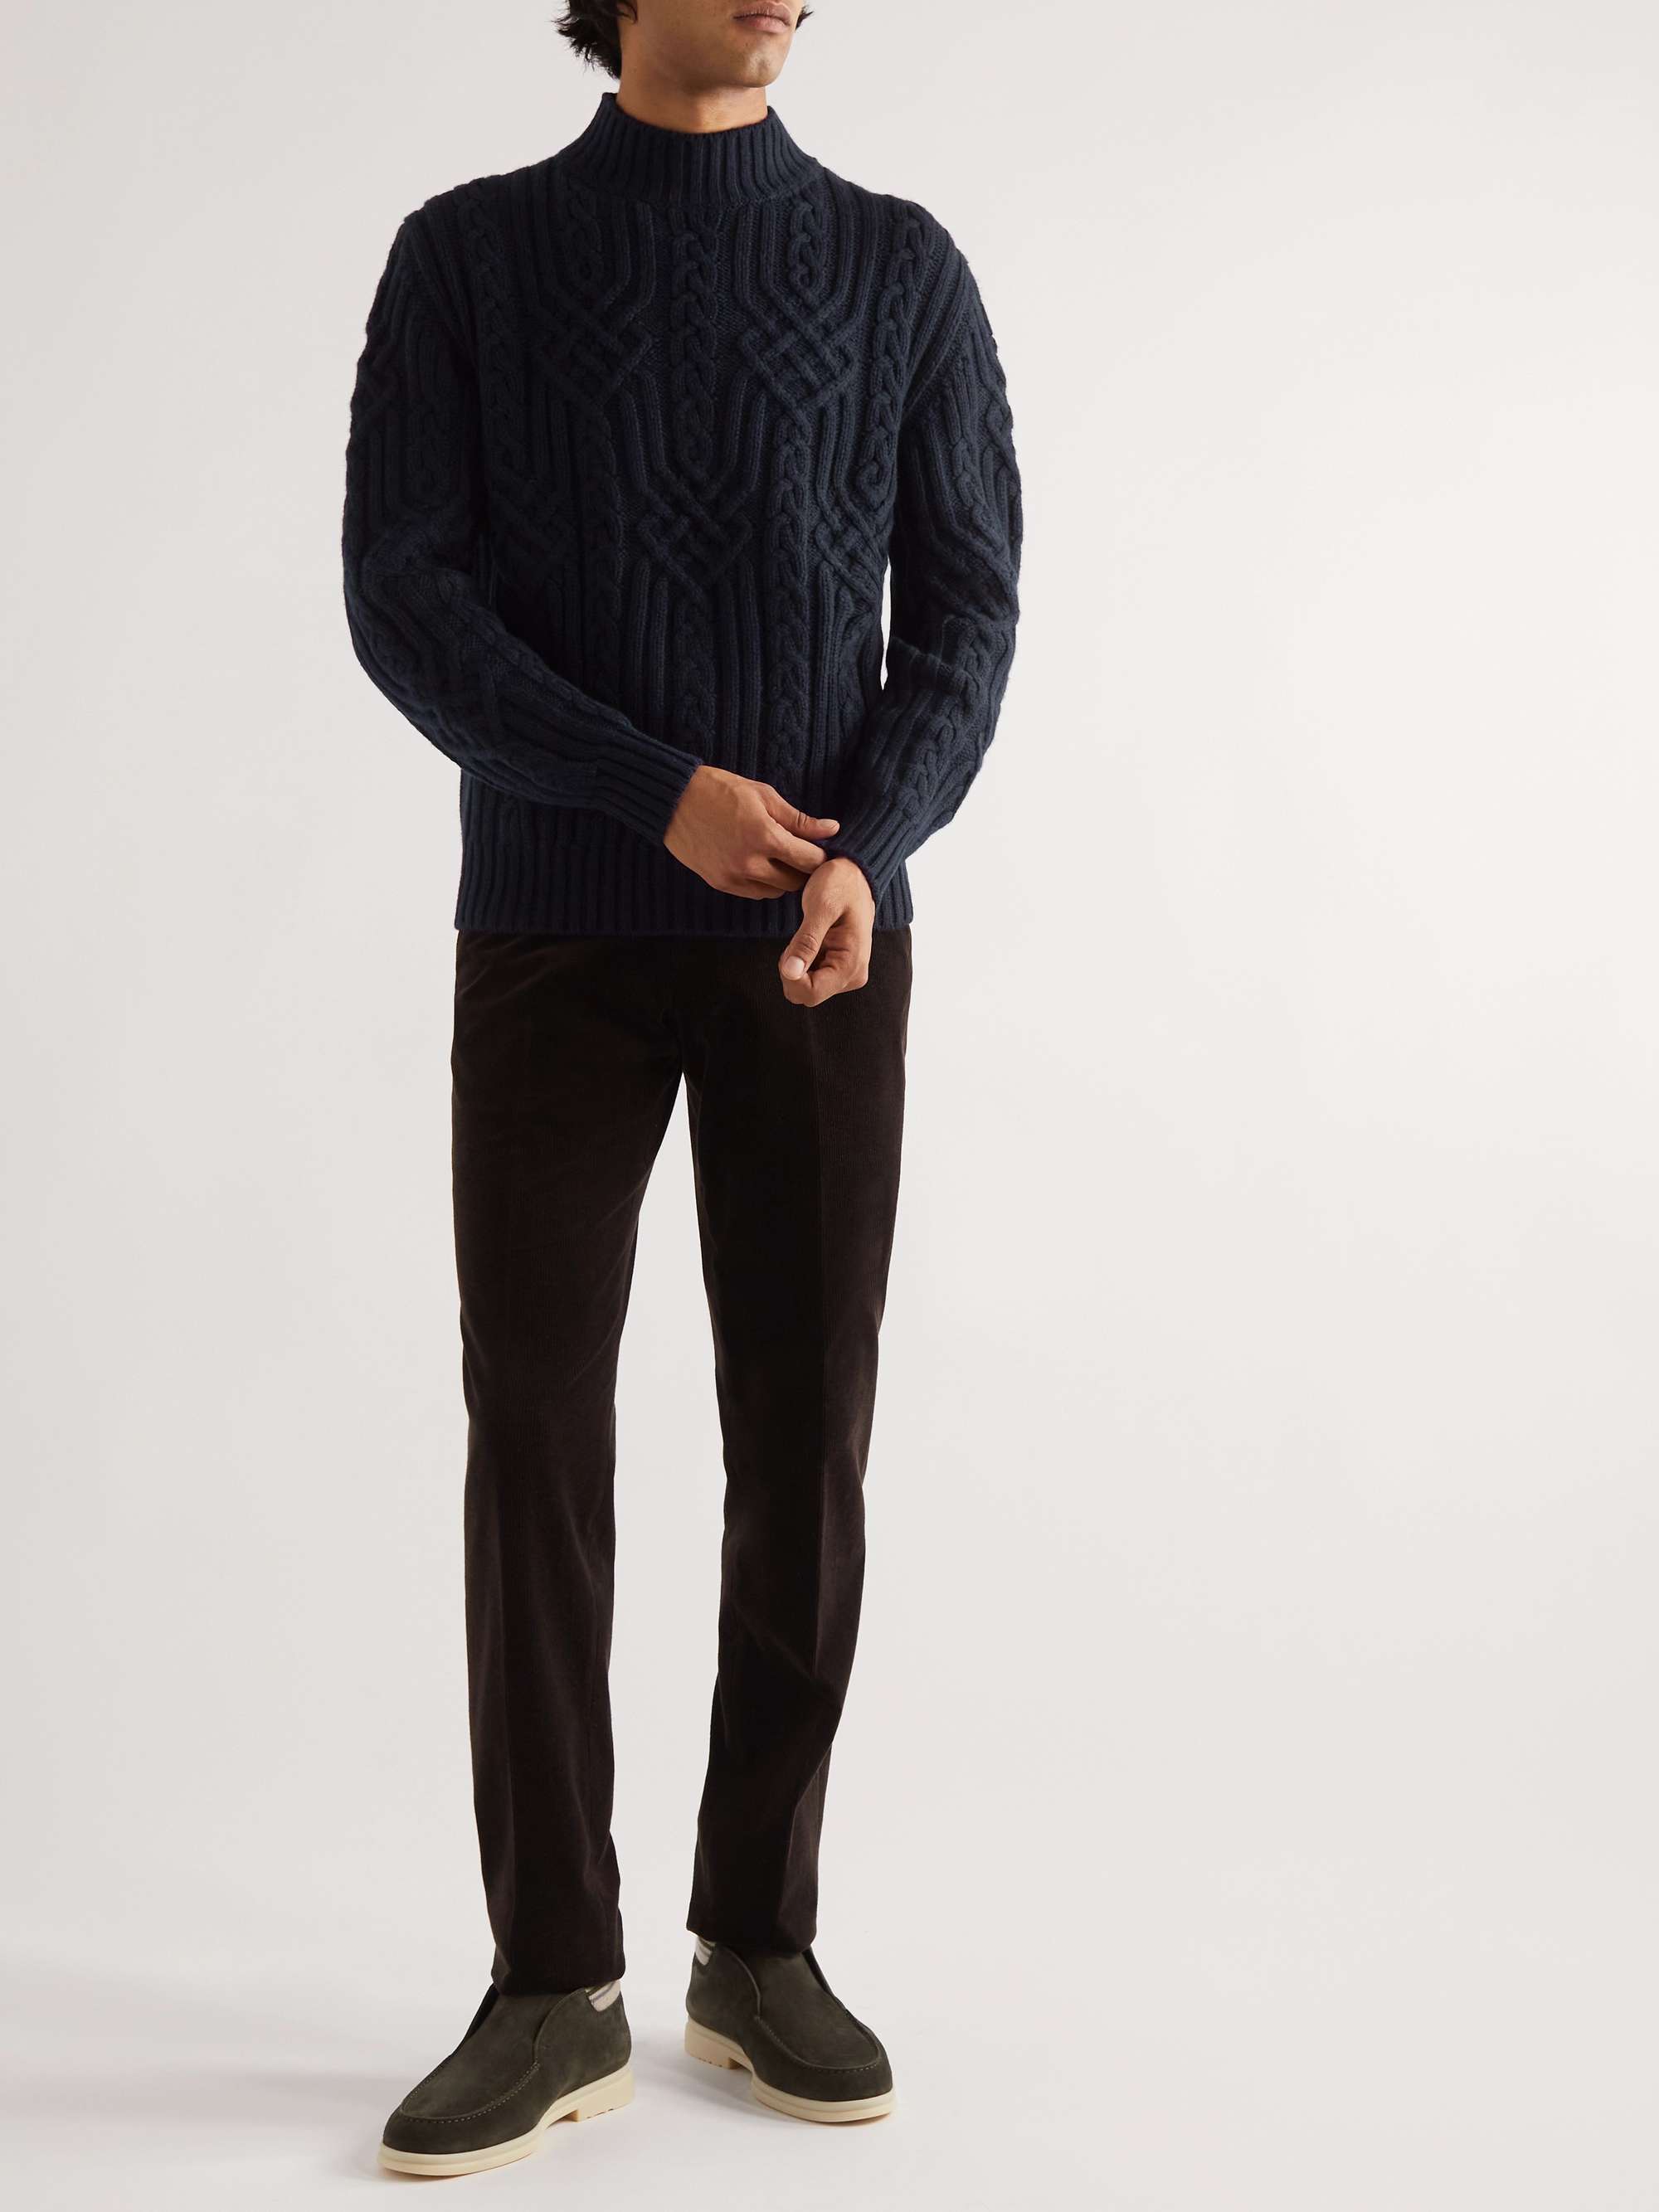 LORO PIANA Ribbed Cable-Knit Cashmere Rollneck Sweater